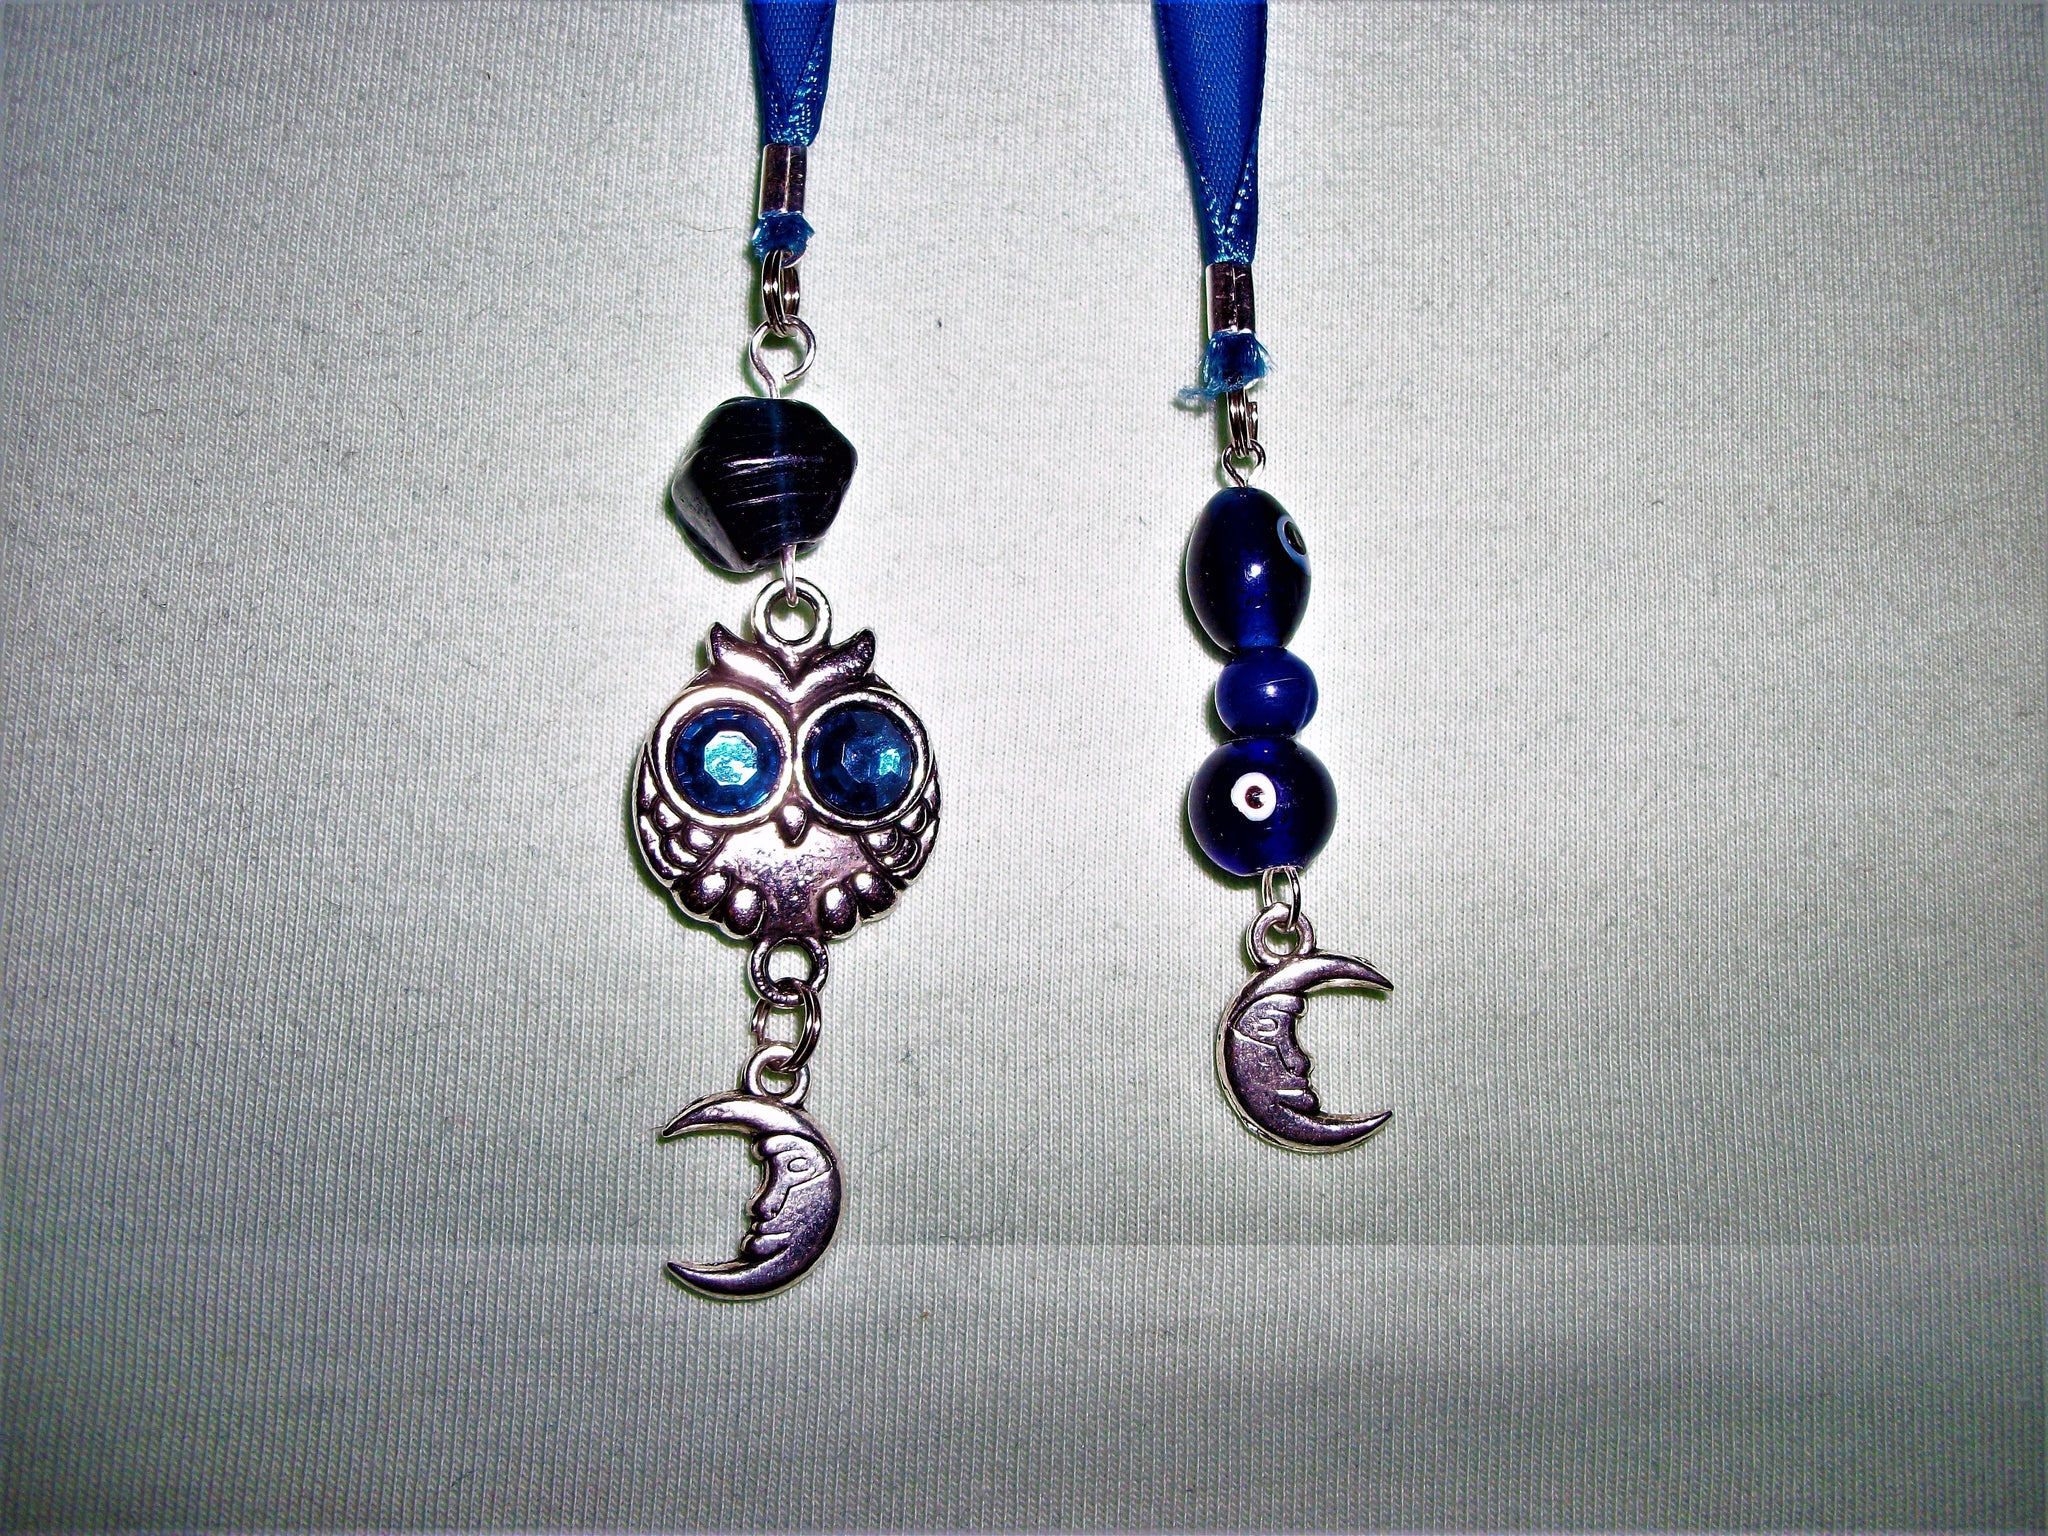 Blue bookmark with blue beads and charms